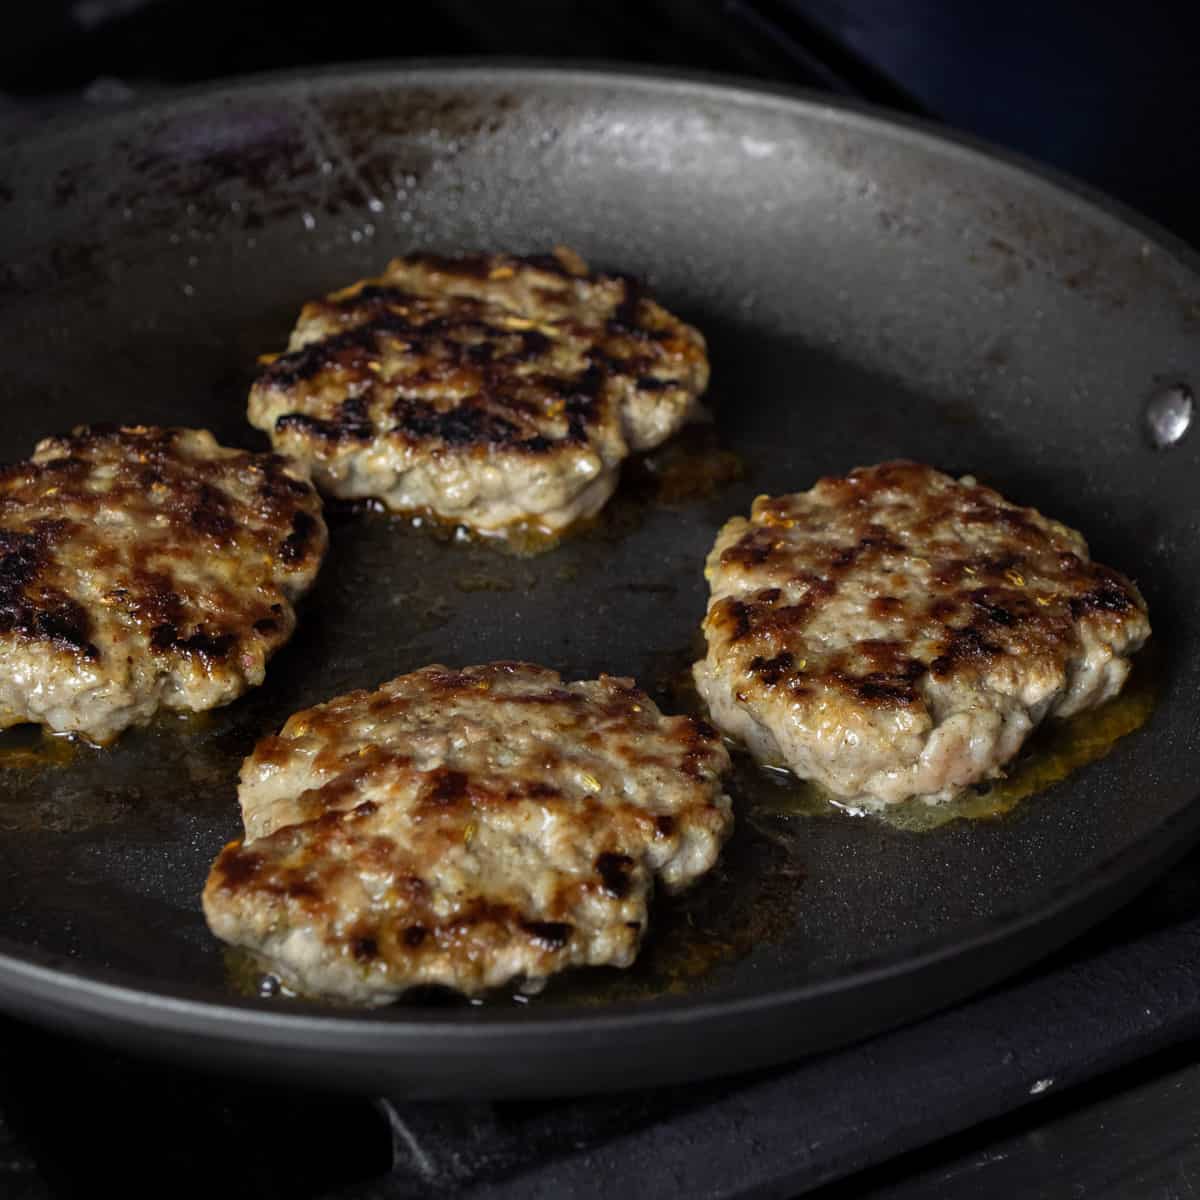 Cooked sausage patties in a skillet.